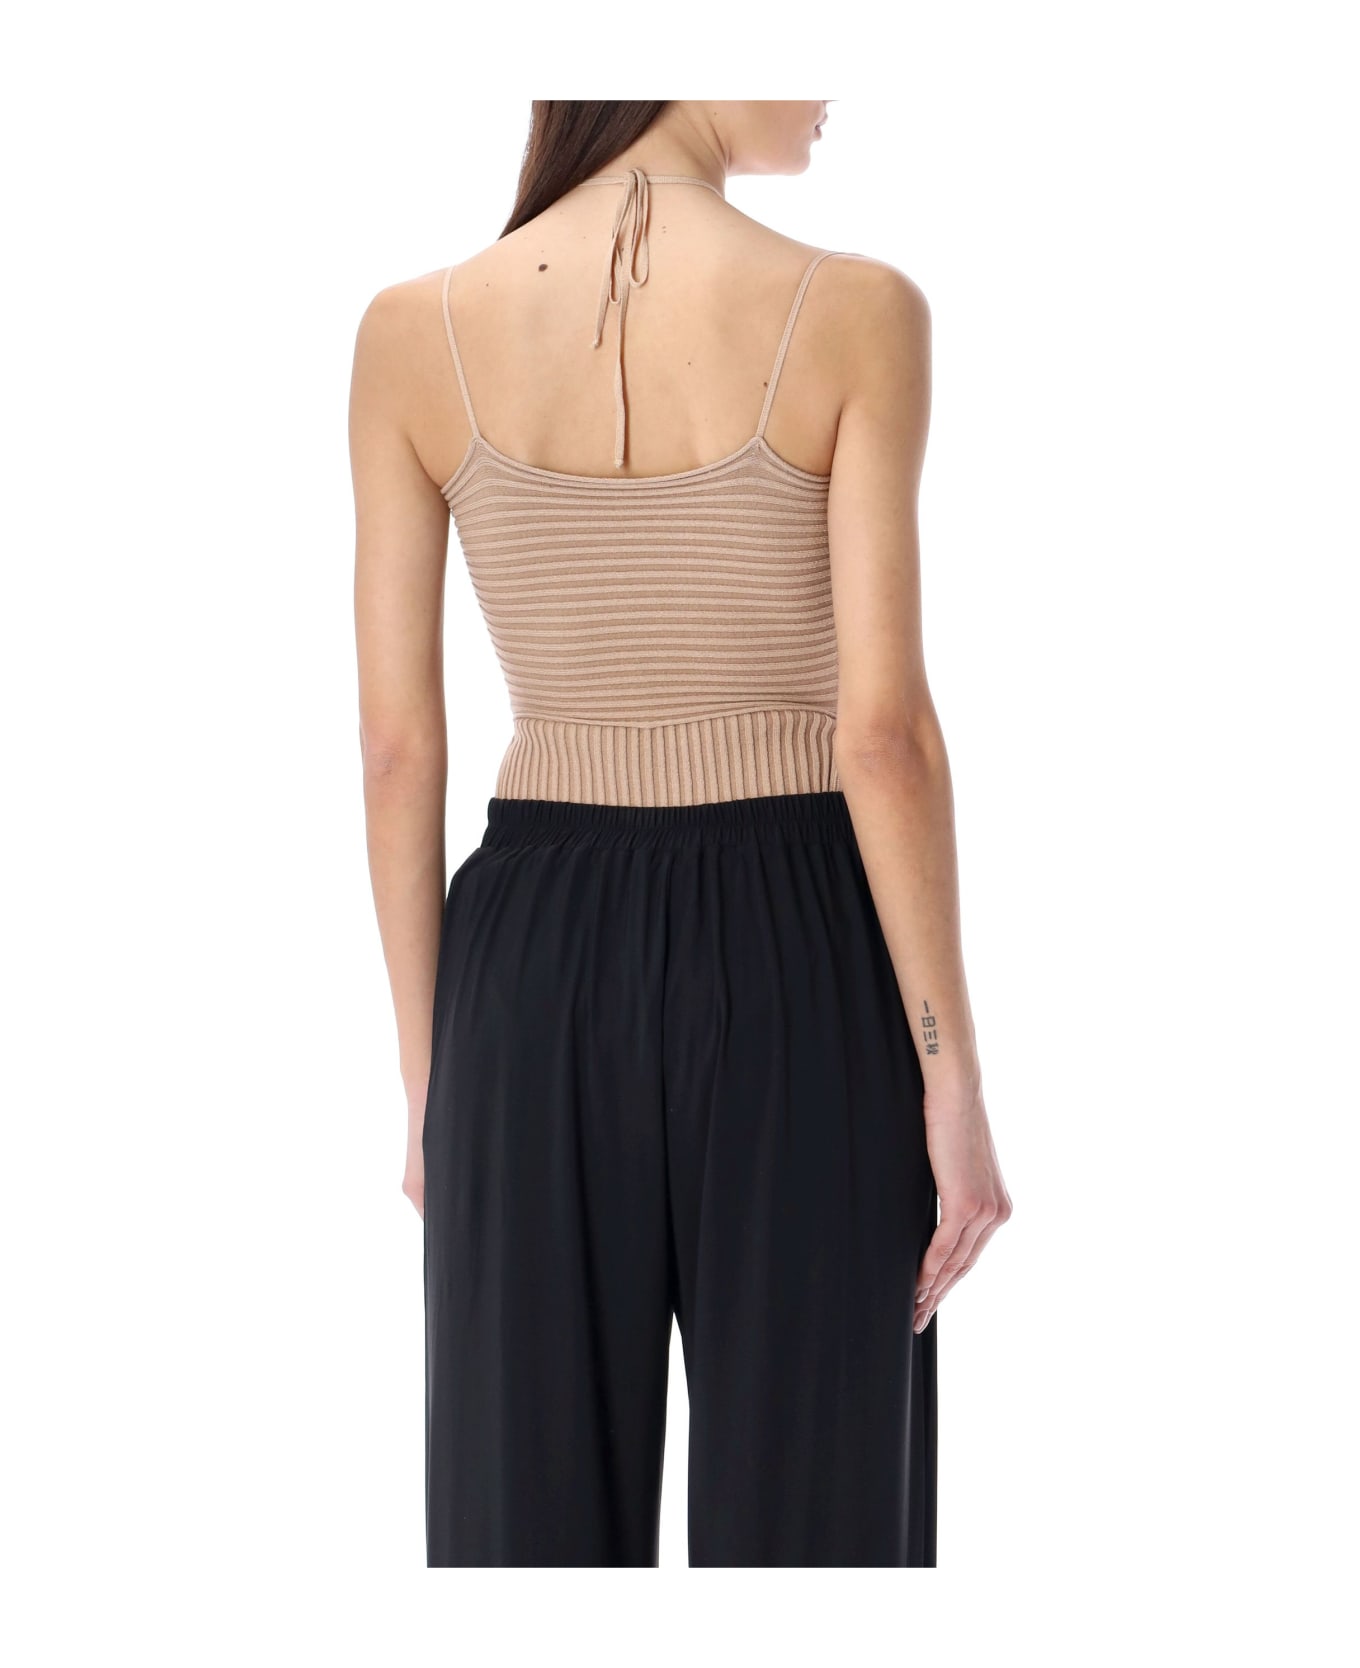 ANDREĀDAMO Ribbed Knit Sleeveless Bodysuit With Cut - NUDE ボトムス